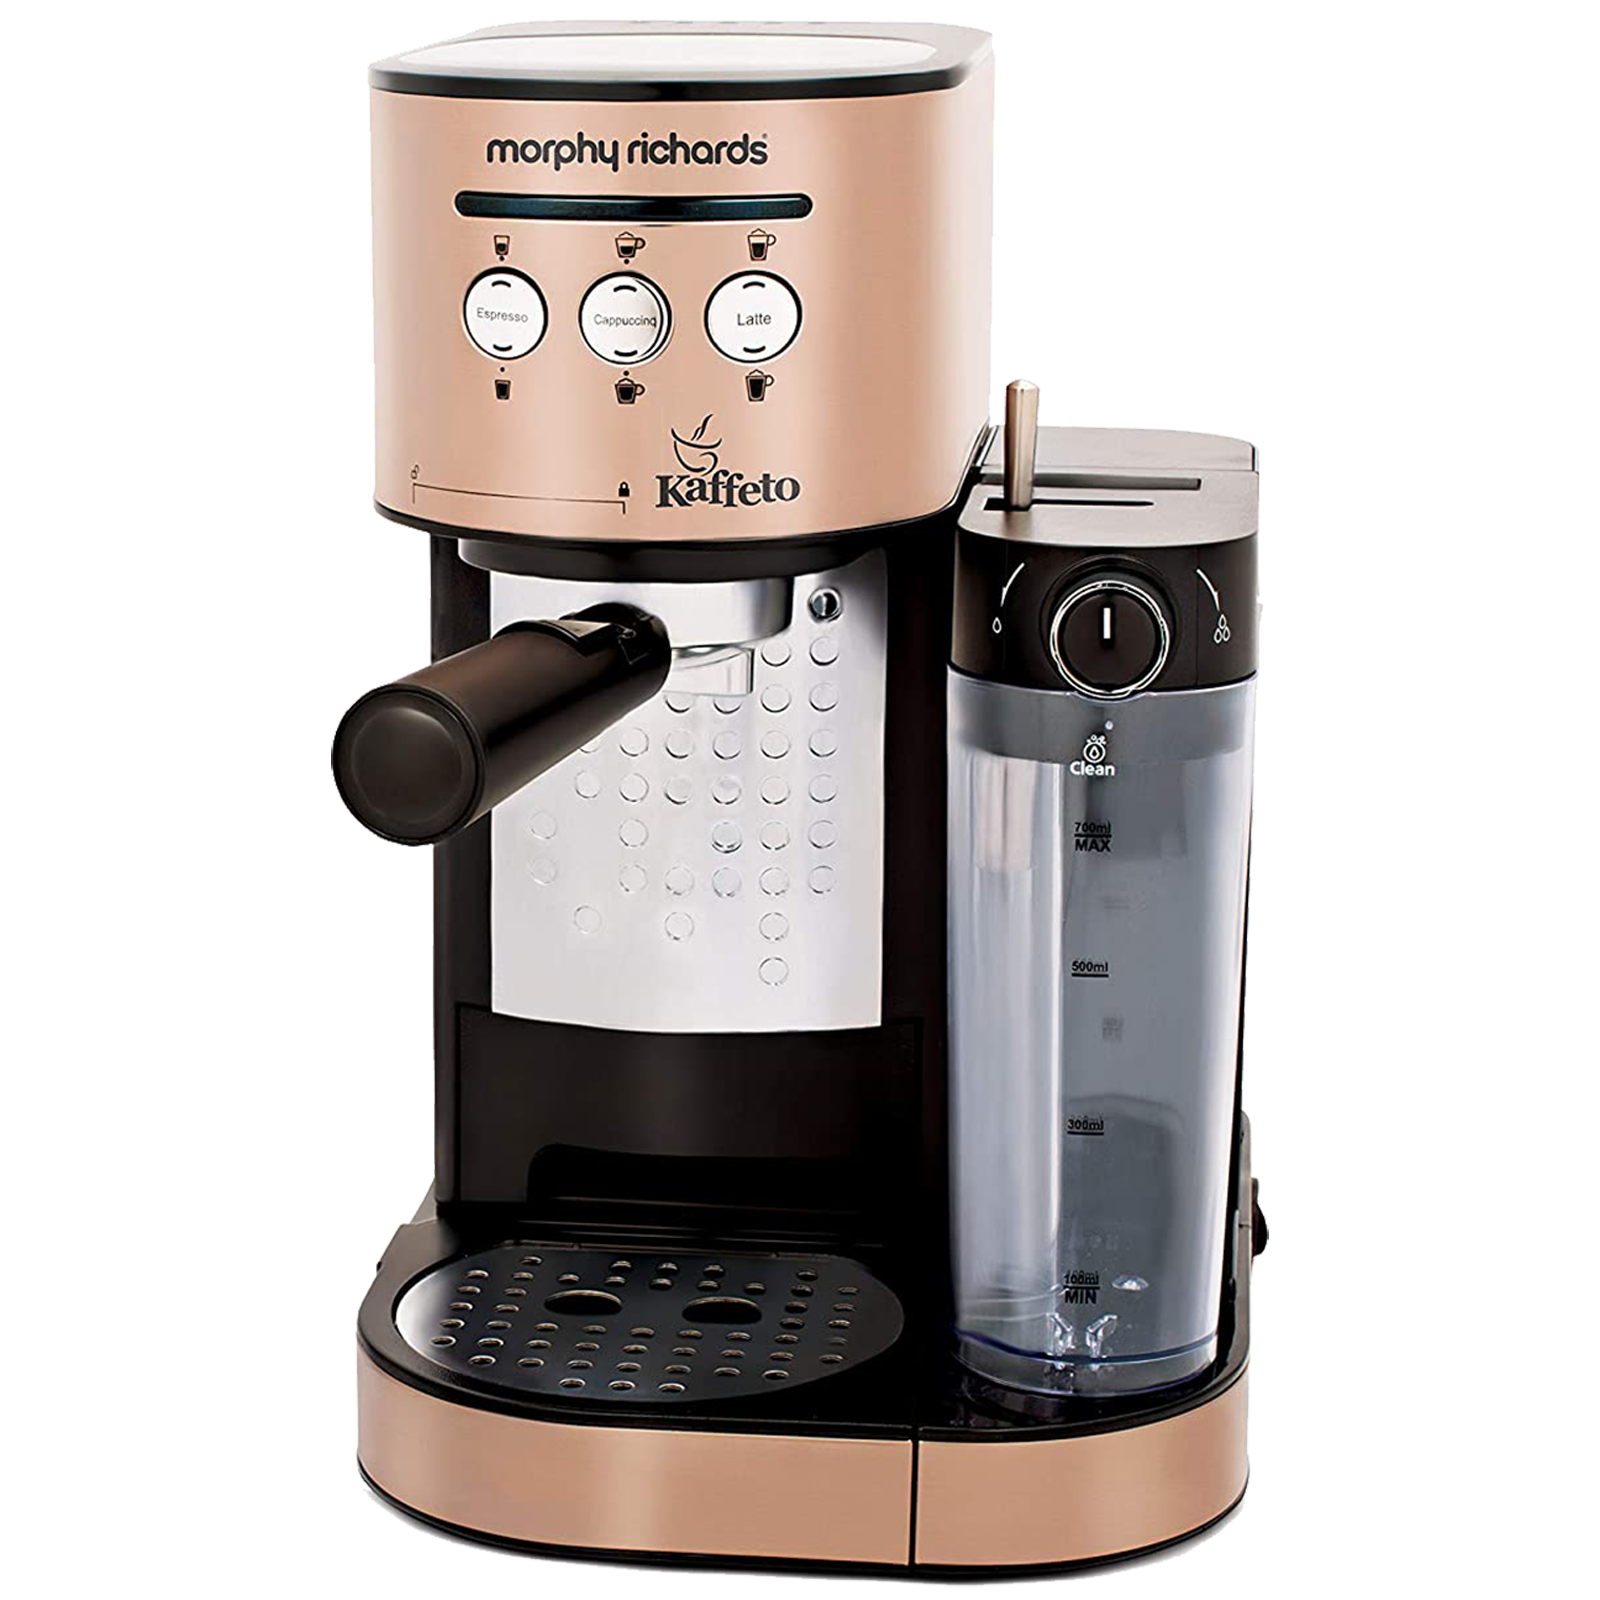   Morphy Richards Kaffeto Fully Automatic Coffee Maker (Makes Espresso/Latte/Cappuccino & Milk Frothing, Dish Washer Safe, 350011, Copper)_1